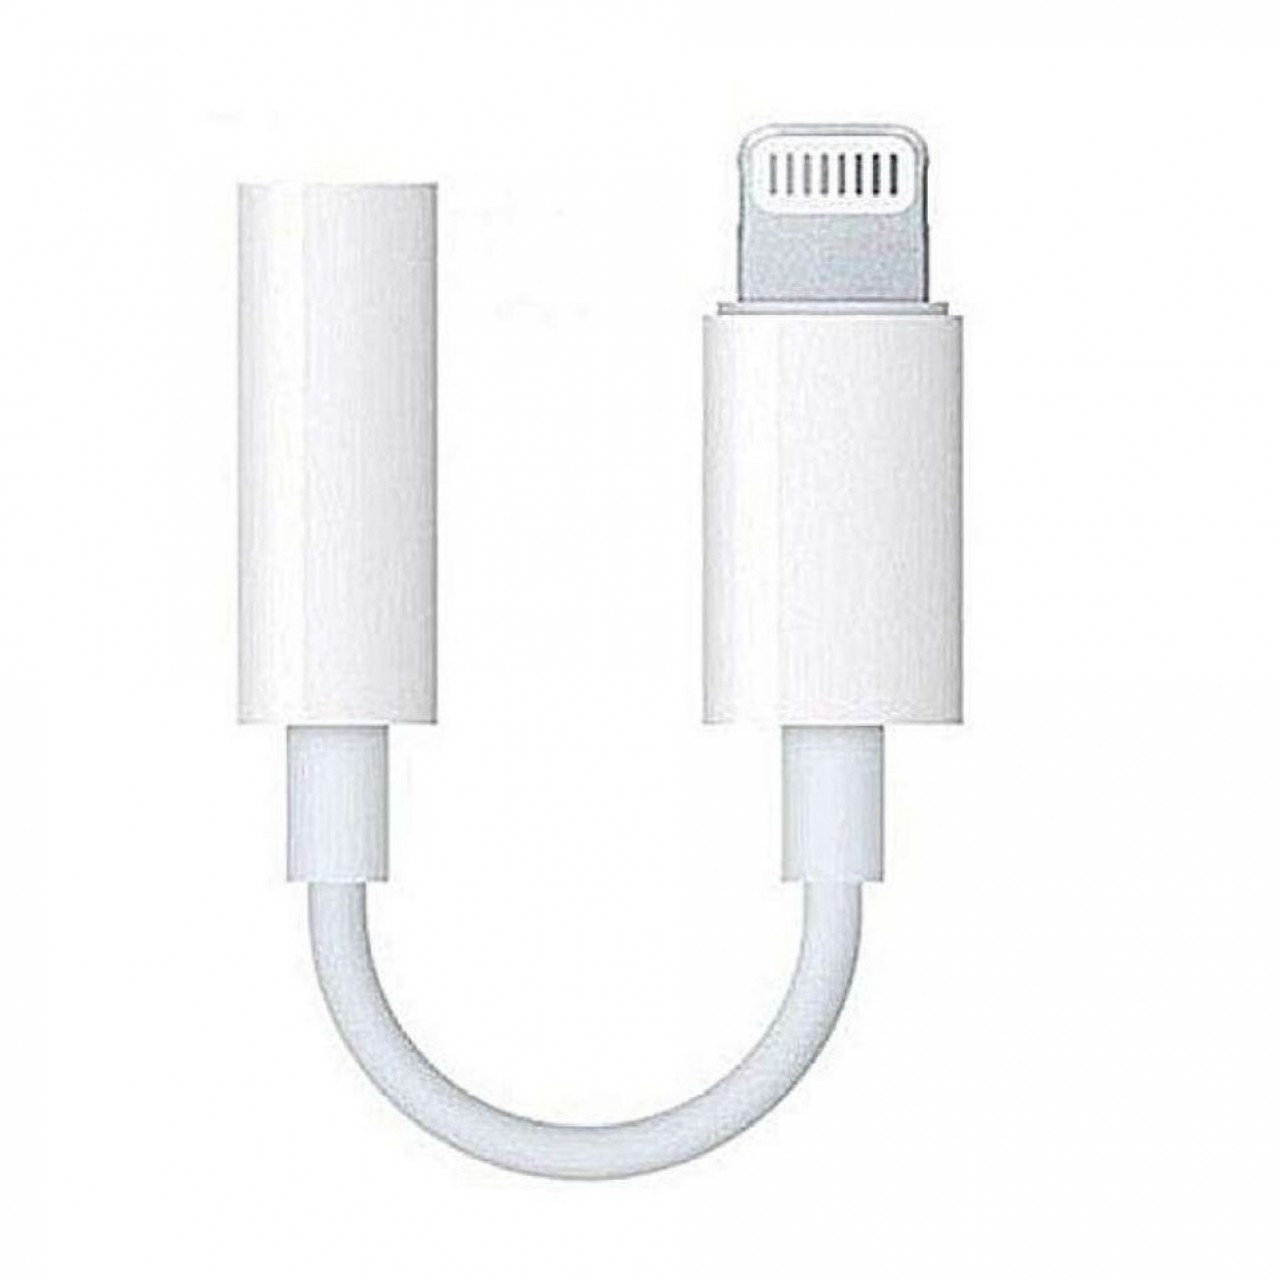 High Quality Handsfree Connector For Iphone 7/ 7 Plus - White